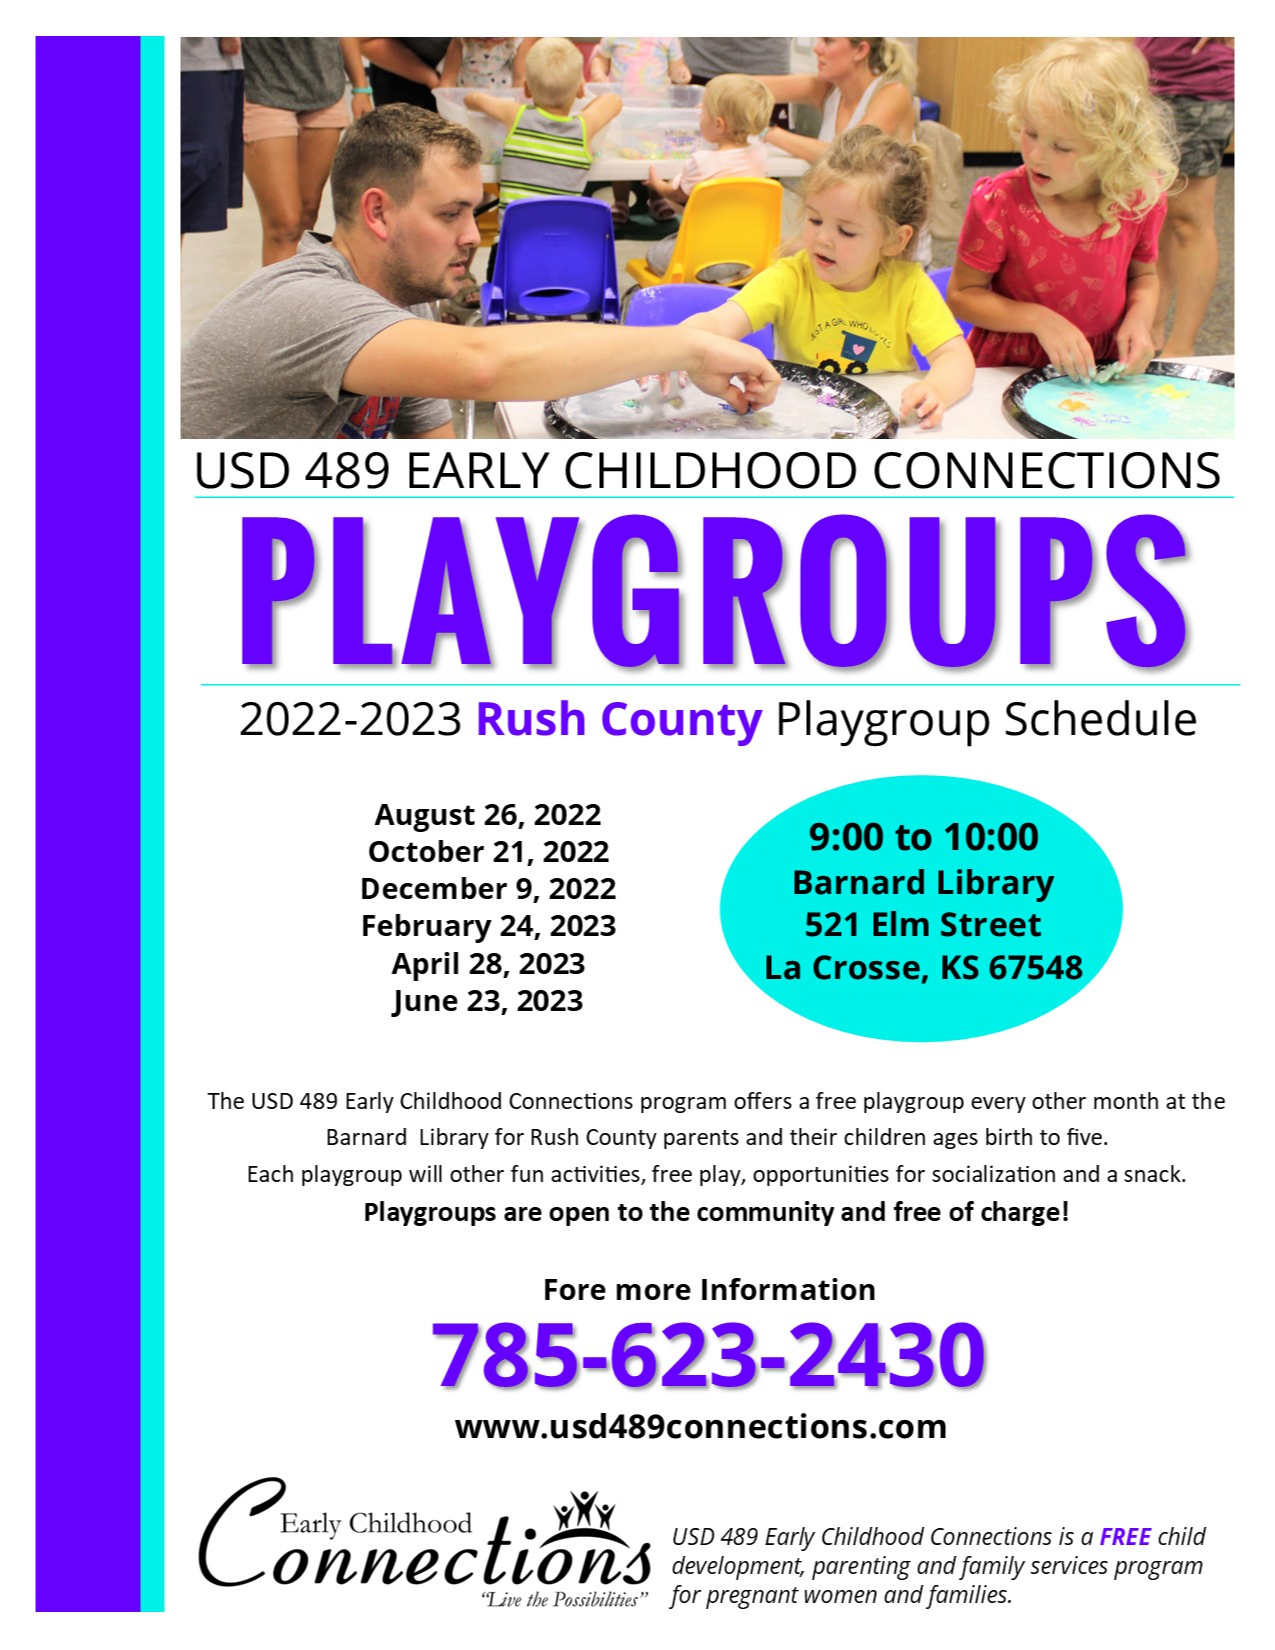 Rush Playgroup Schedule